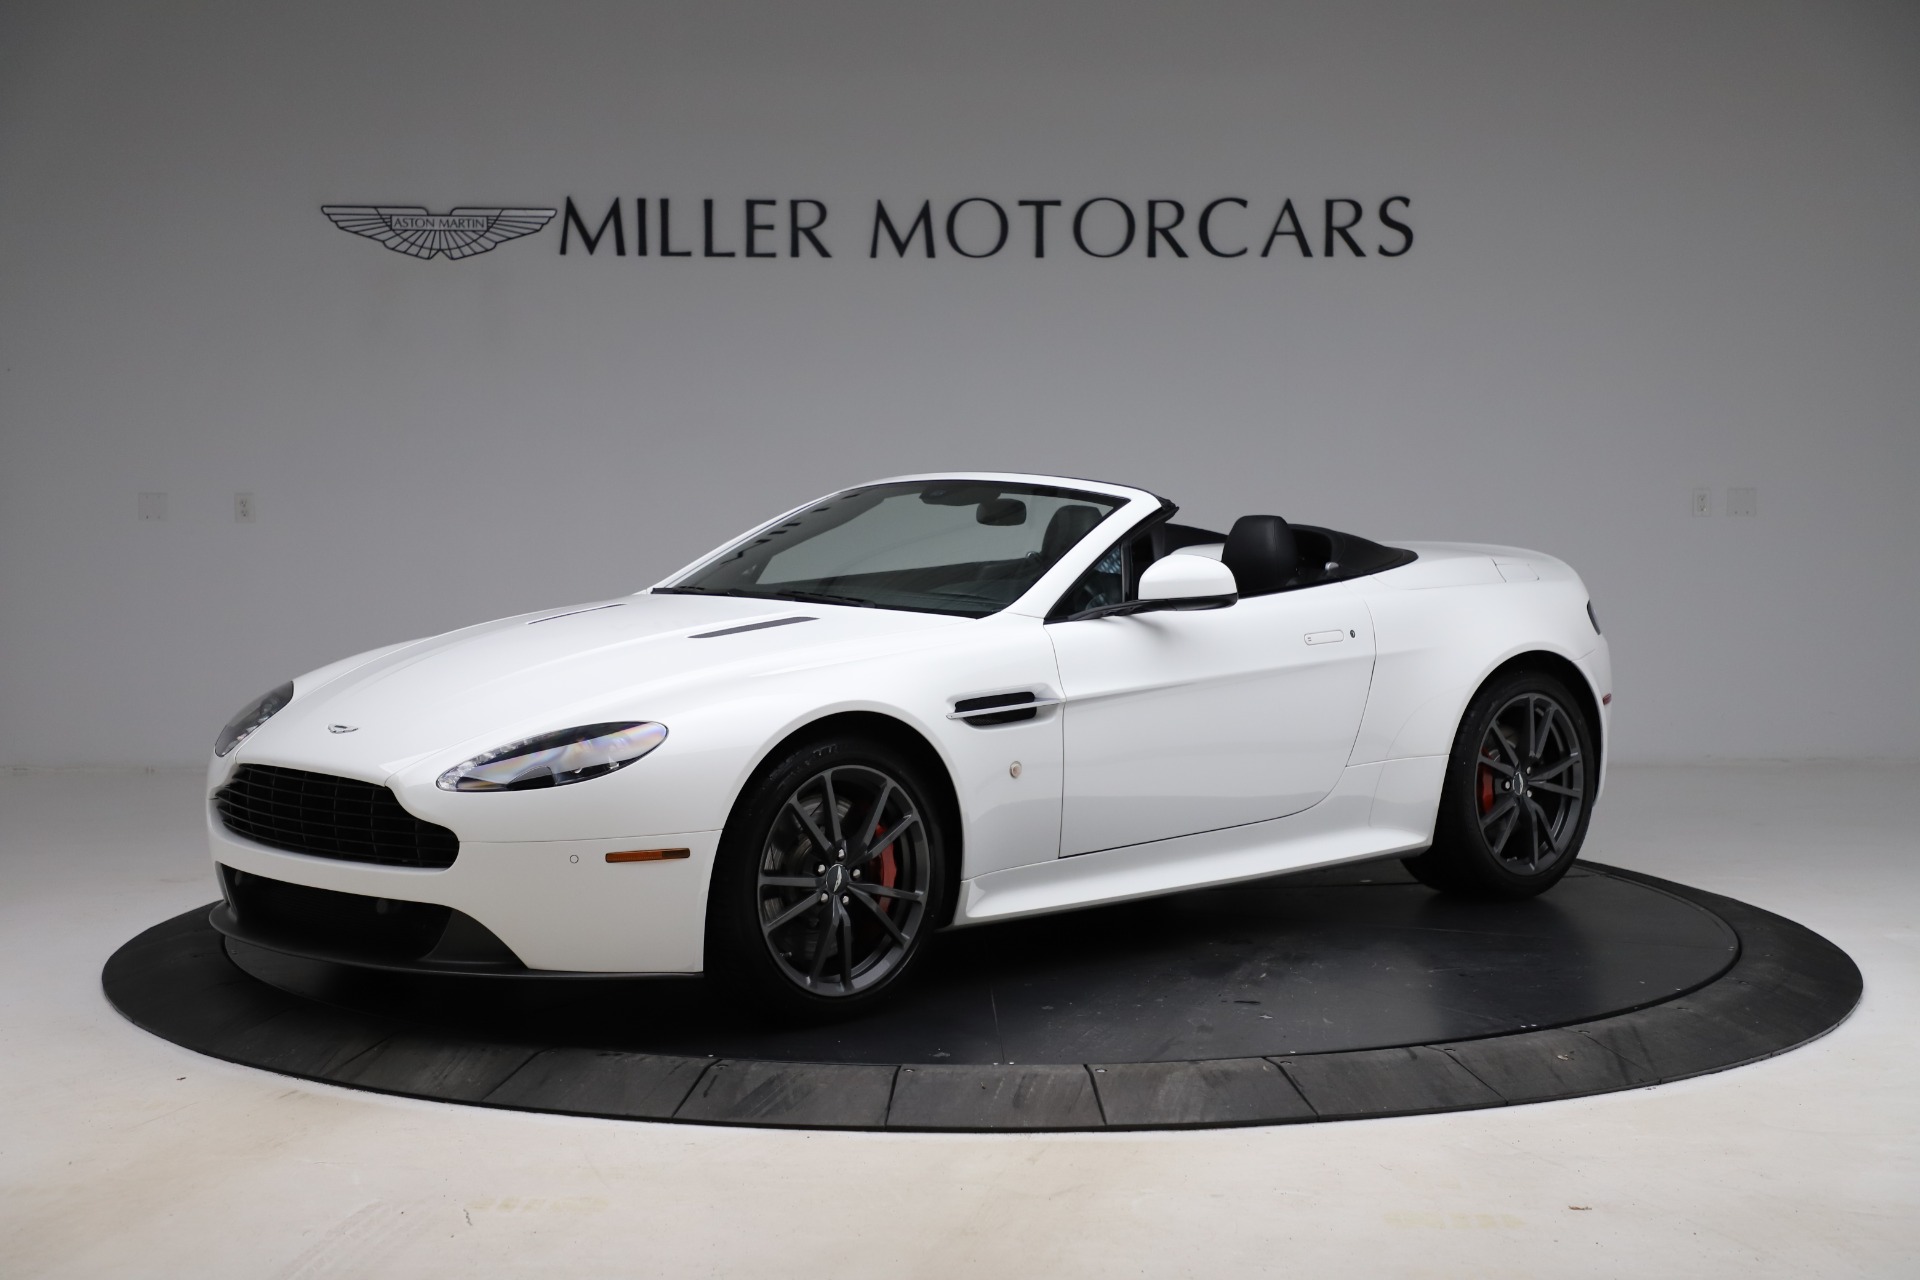 Used 2015 Aston Martin V8 Vantage GT Roadster for sale Sold at Aston Martin of Greenwich in Greenwich CT 06830 1